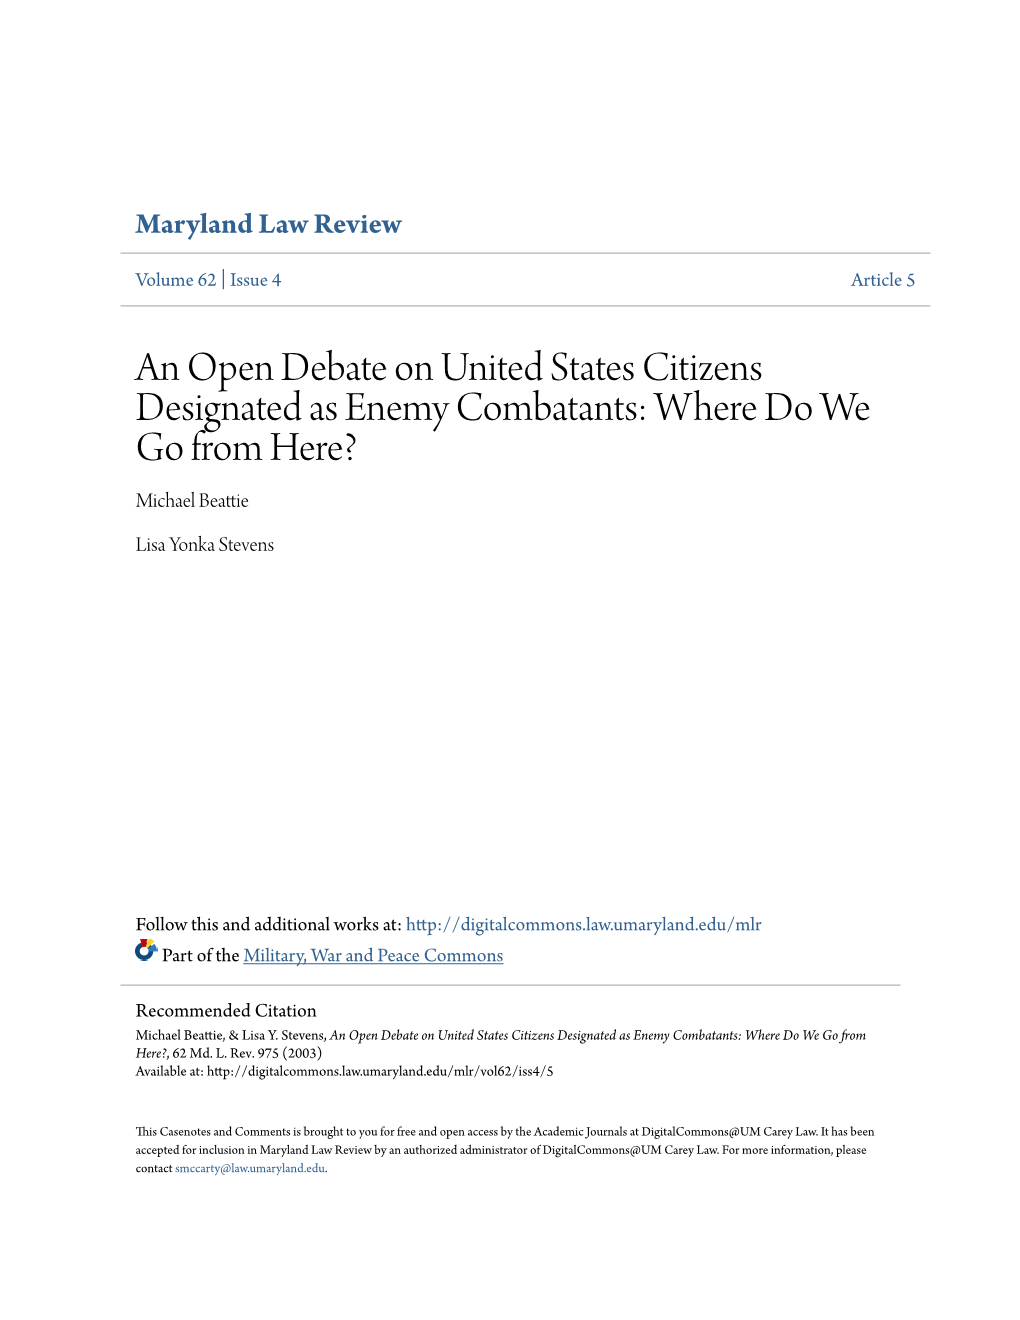 An Open Debate on United States Citizens Designated As Enemy Combatants: Where Do We Go from Here? Michael Beattie